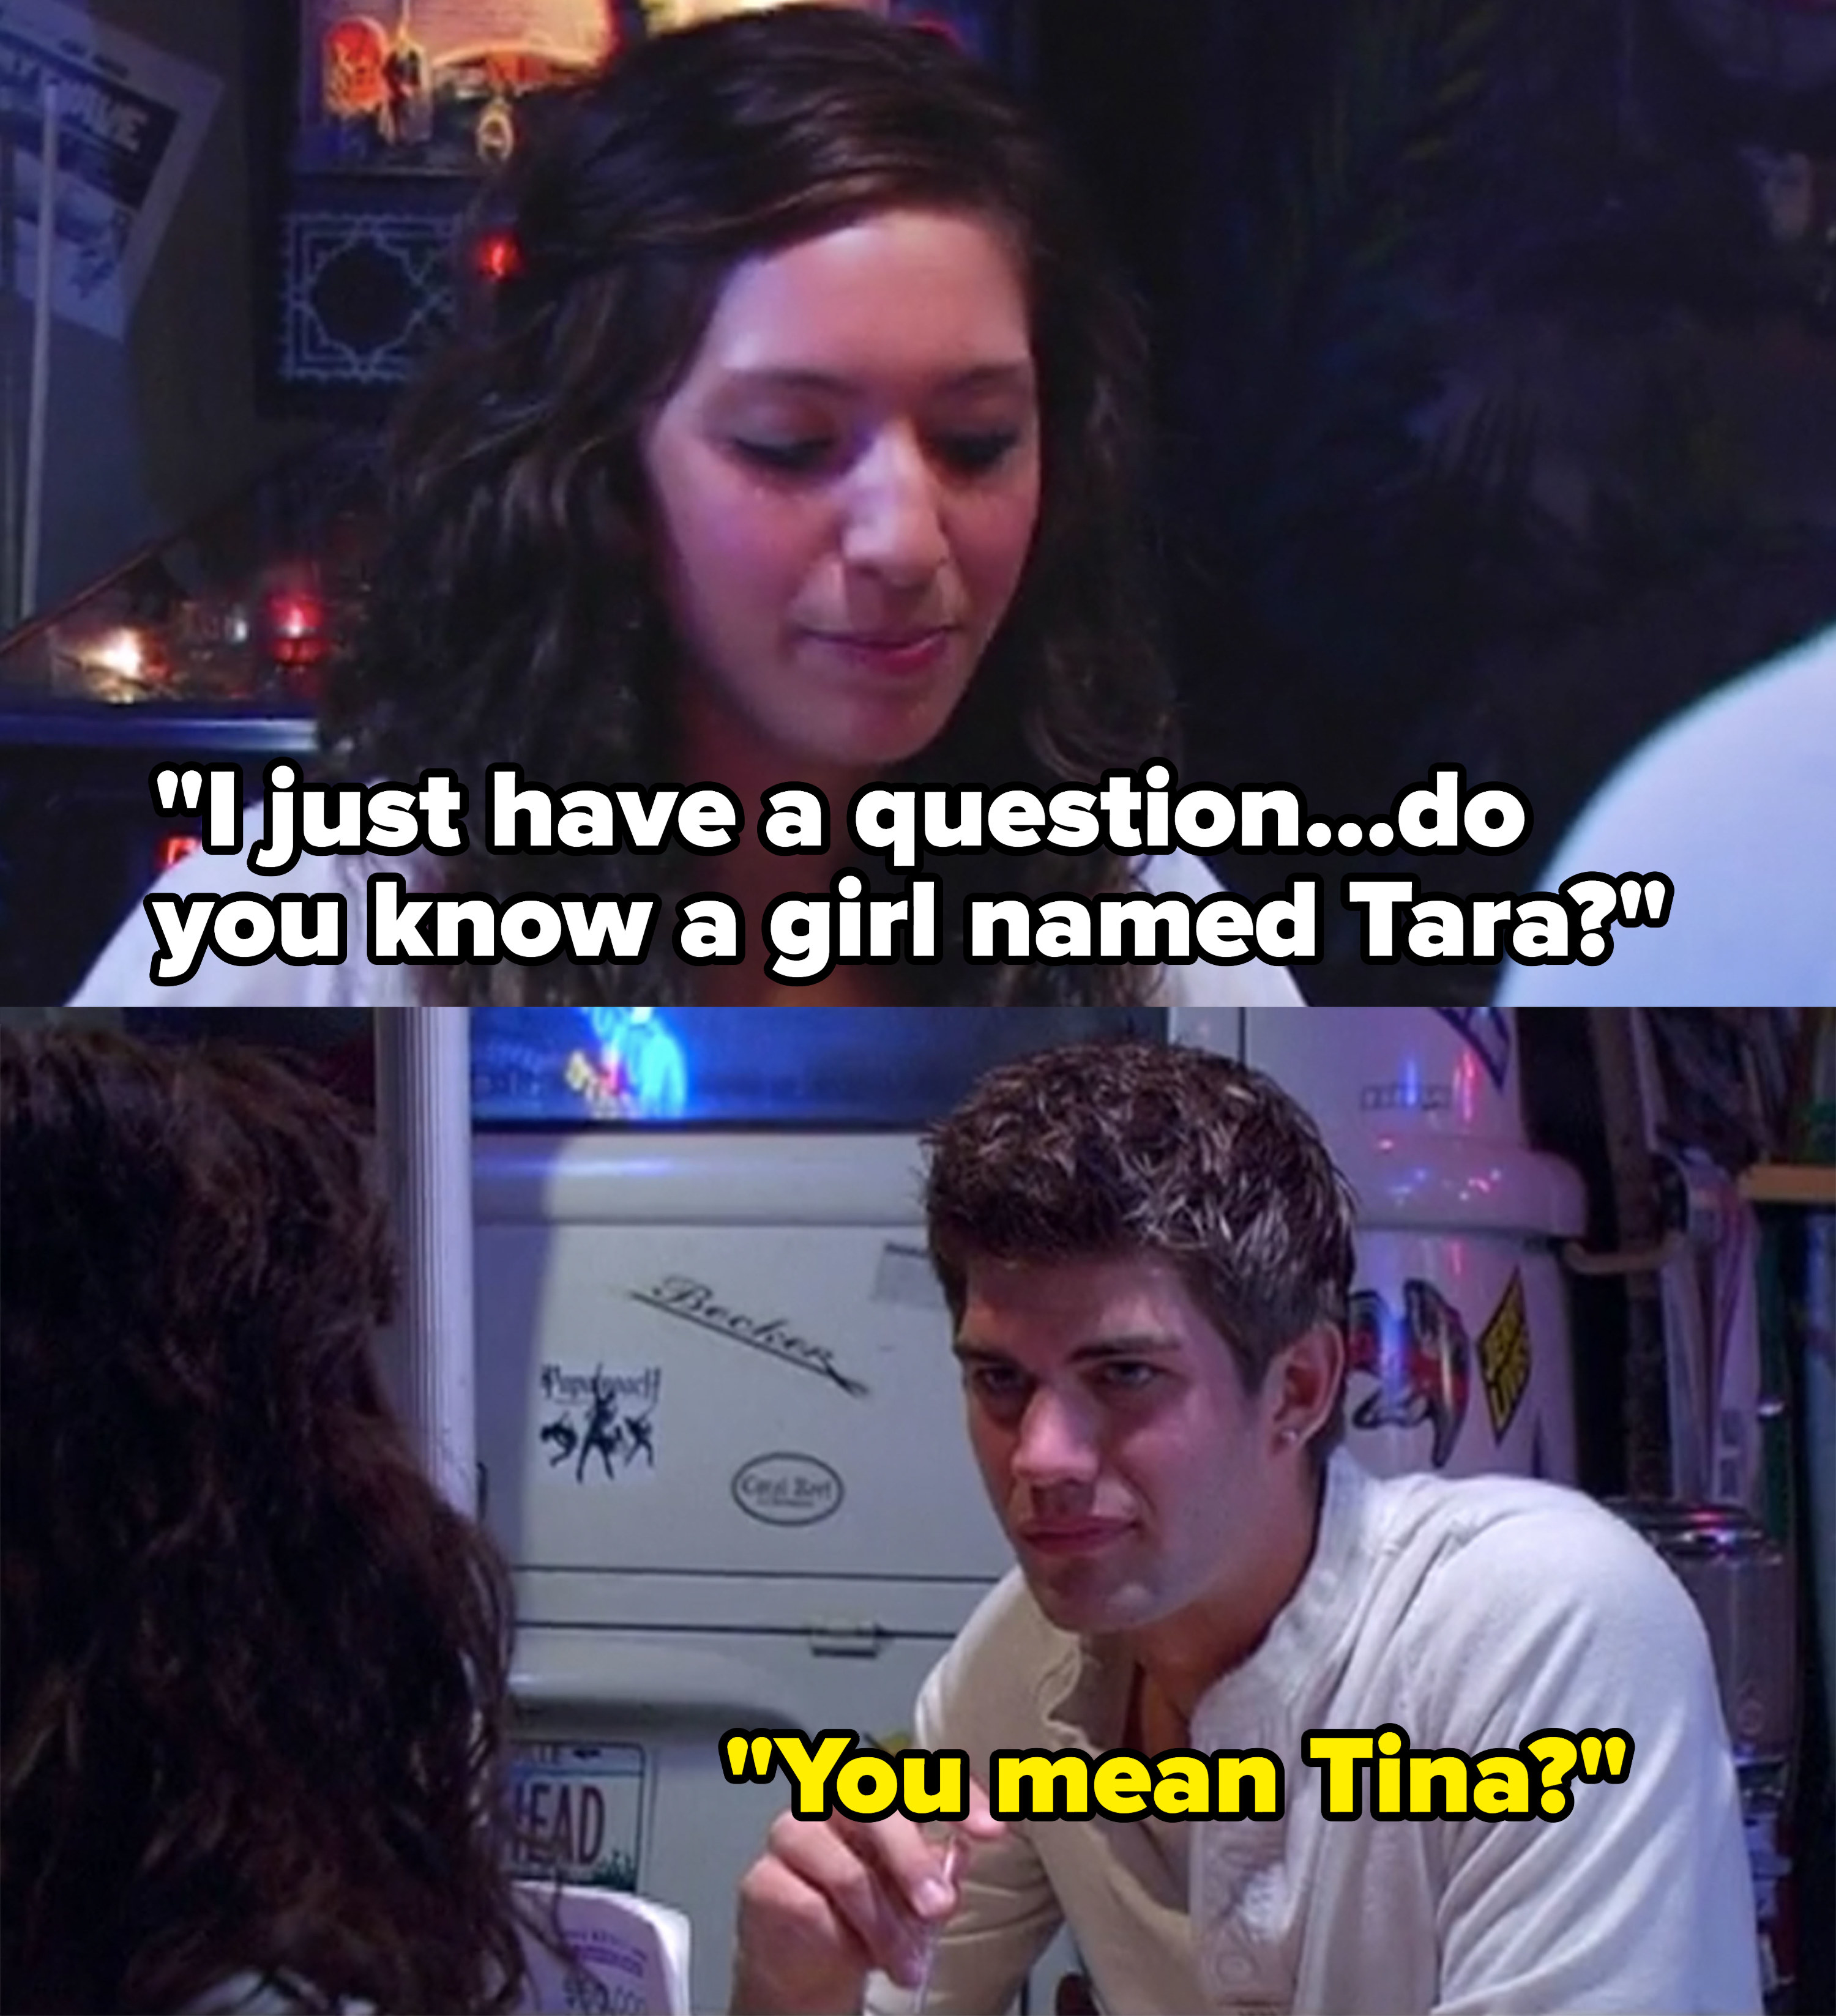 Farrah asks Cole if he knows a girl named Tara and he responds, &quot;You mean Tina?&quot;